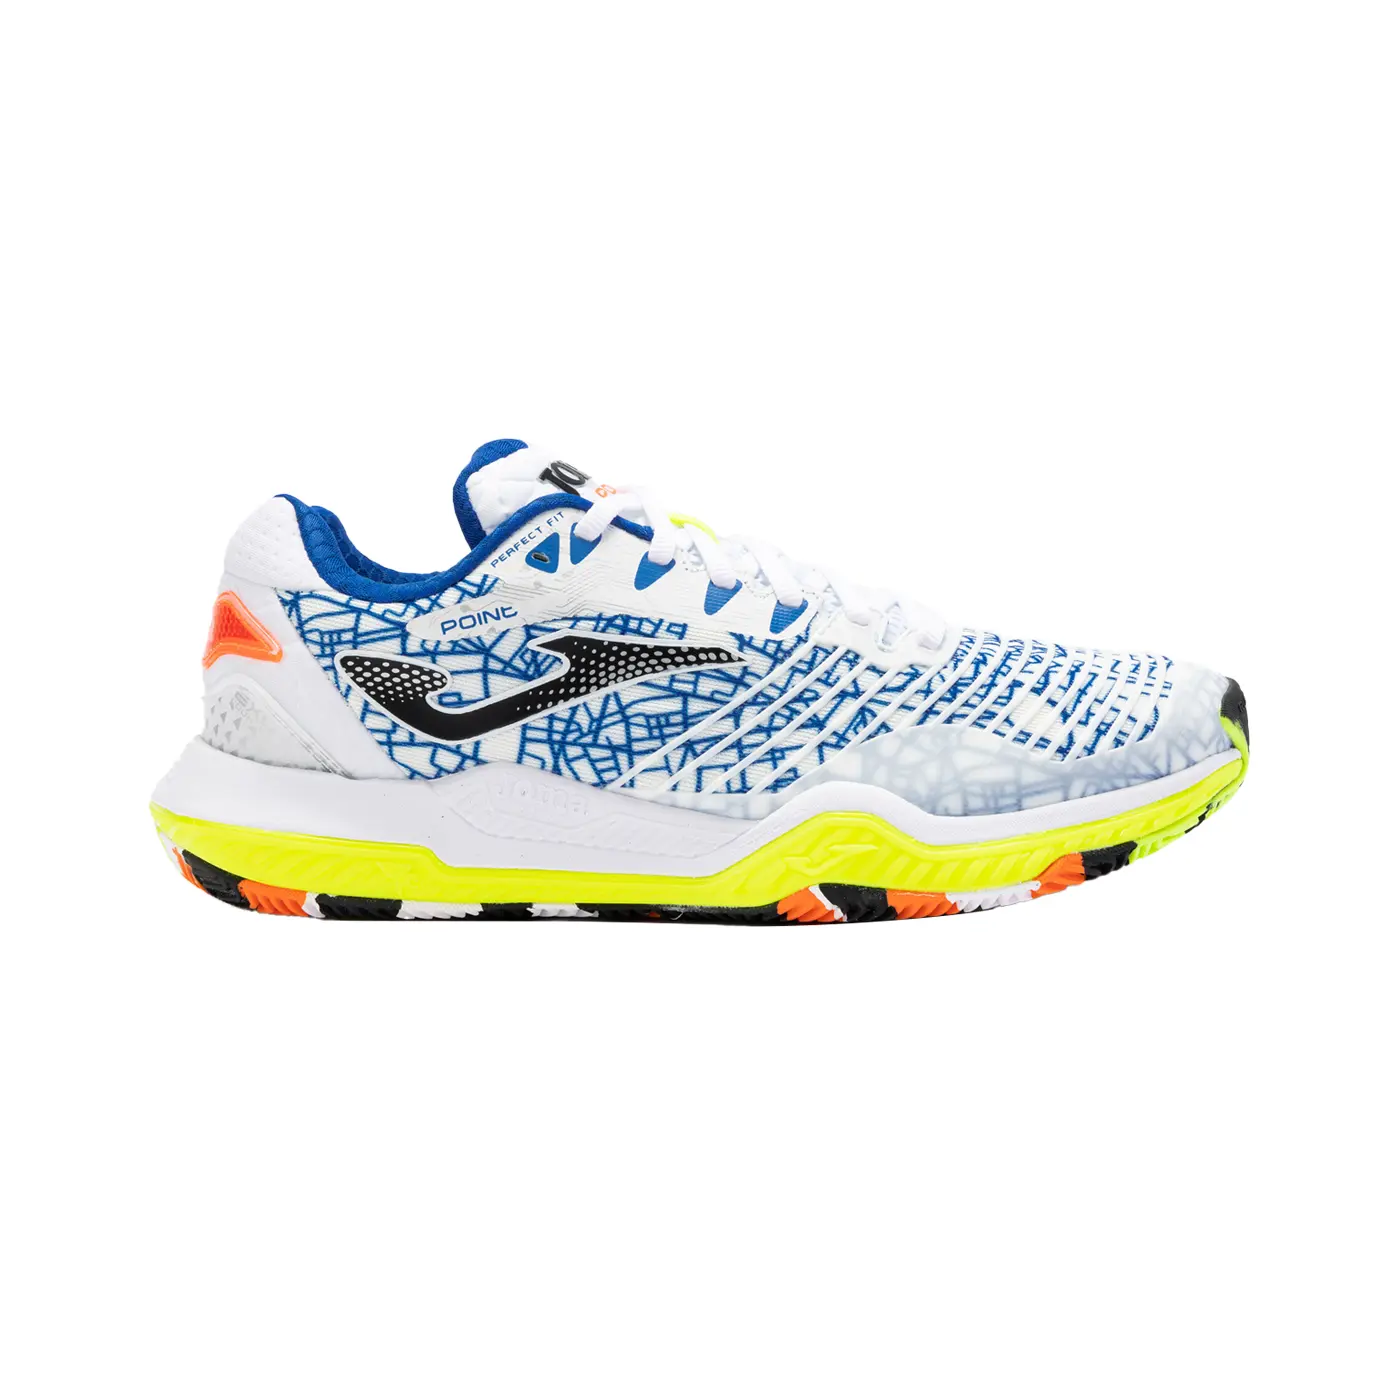 JOMA T.POINT MEN 2202 Padel Shoes Image 1